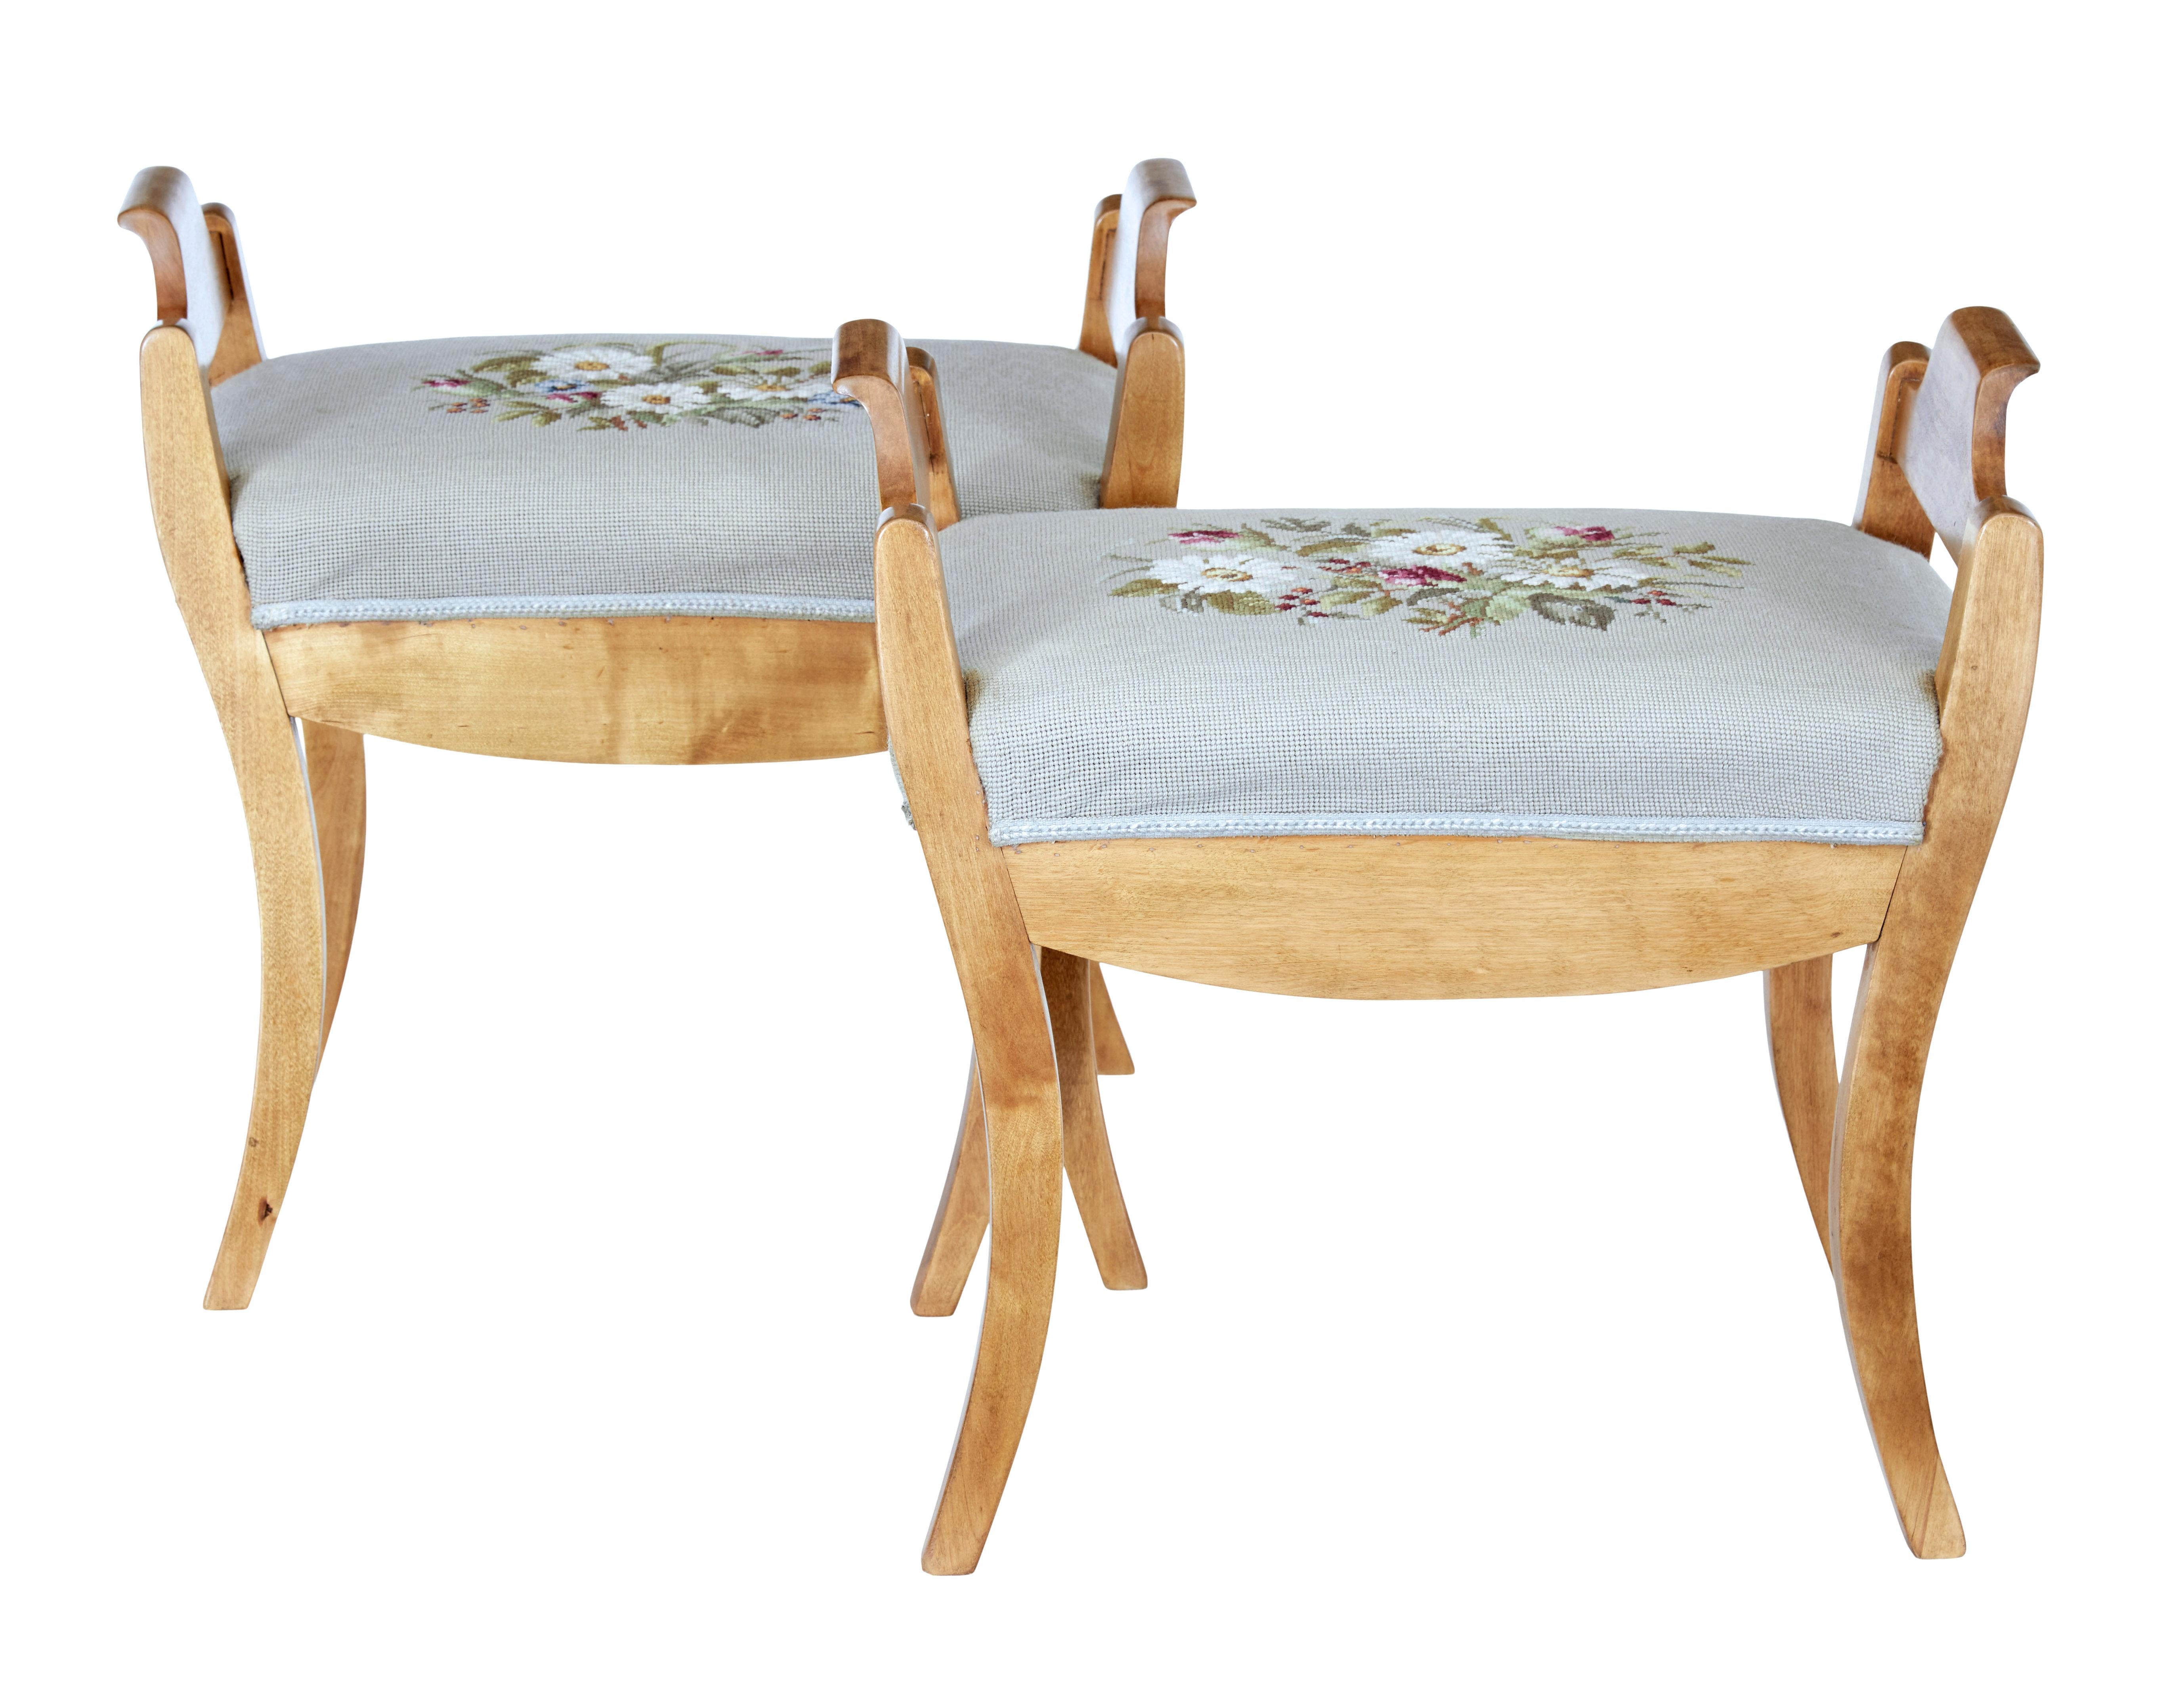 20th Century English Turn of the Century Birch Stools with Curving Arms and Saber Legs For Sale